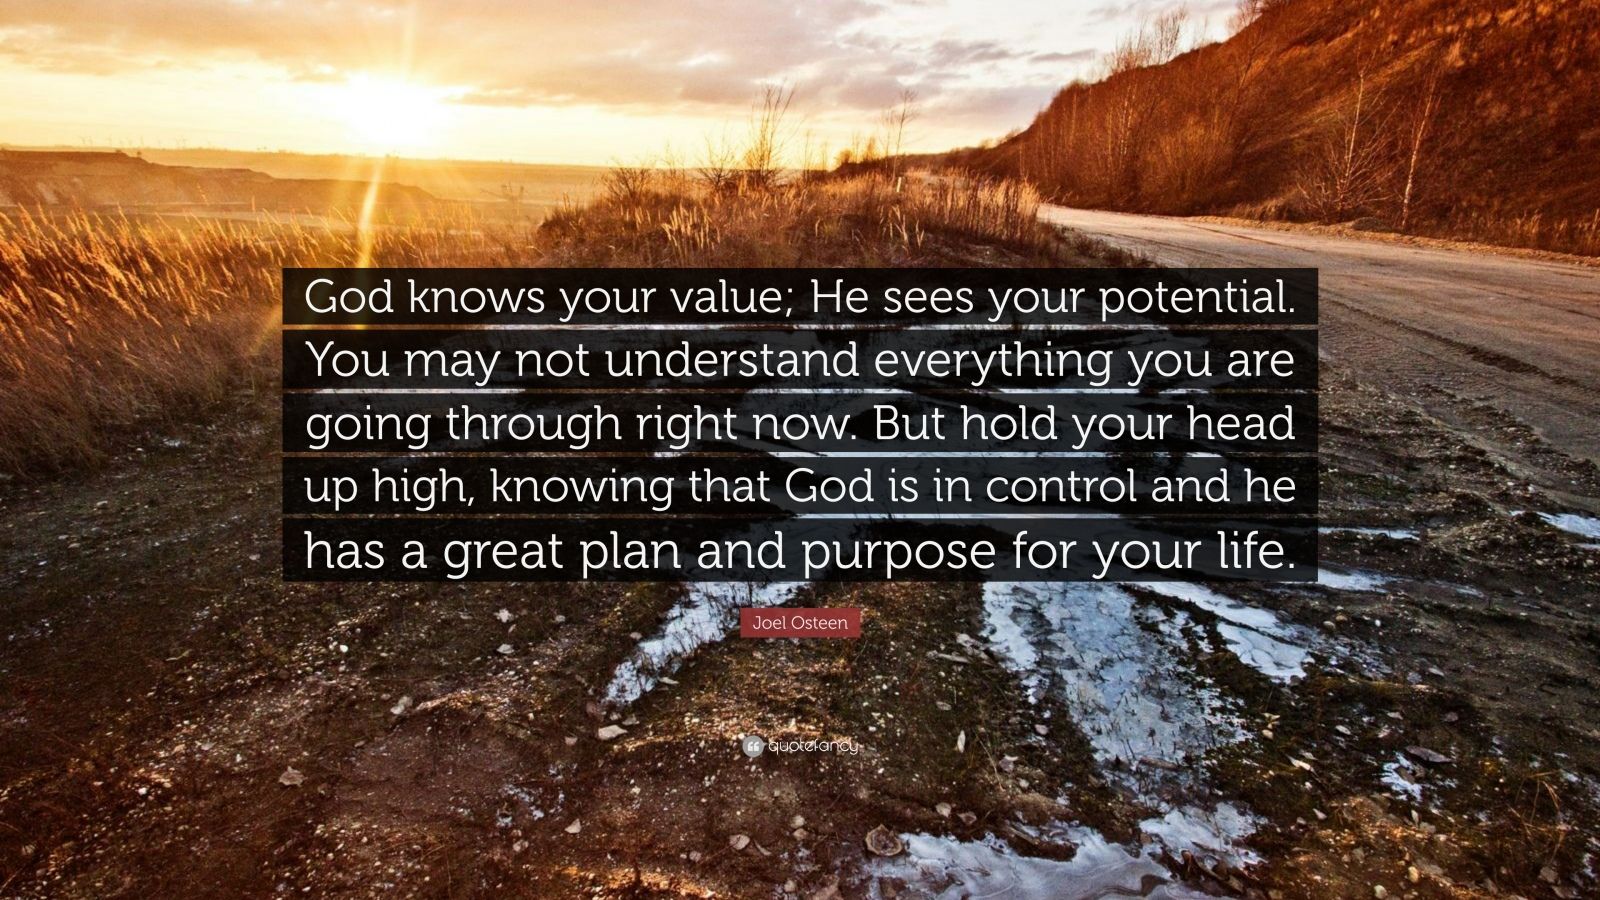 Joel Osteen Quote “God knows your value He sees your potential You